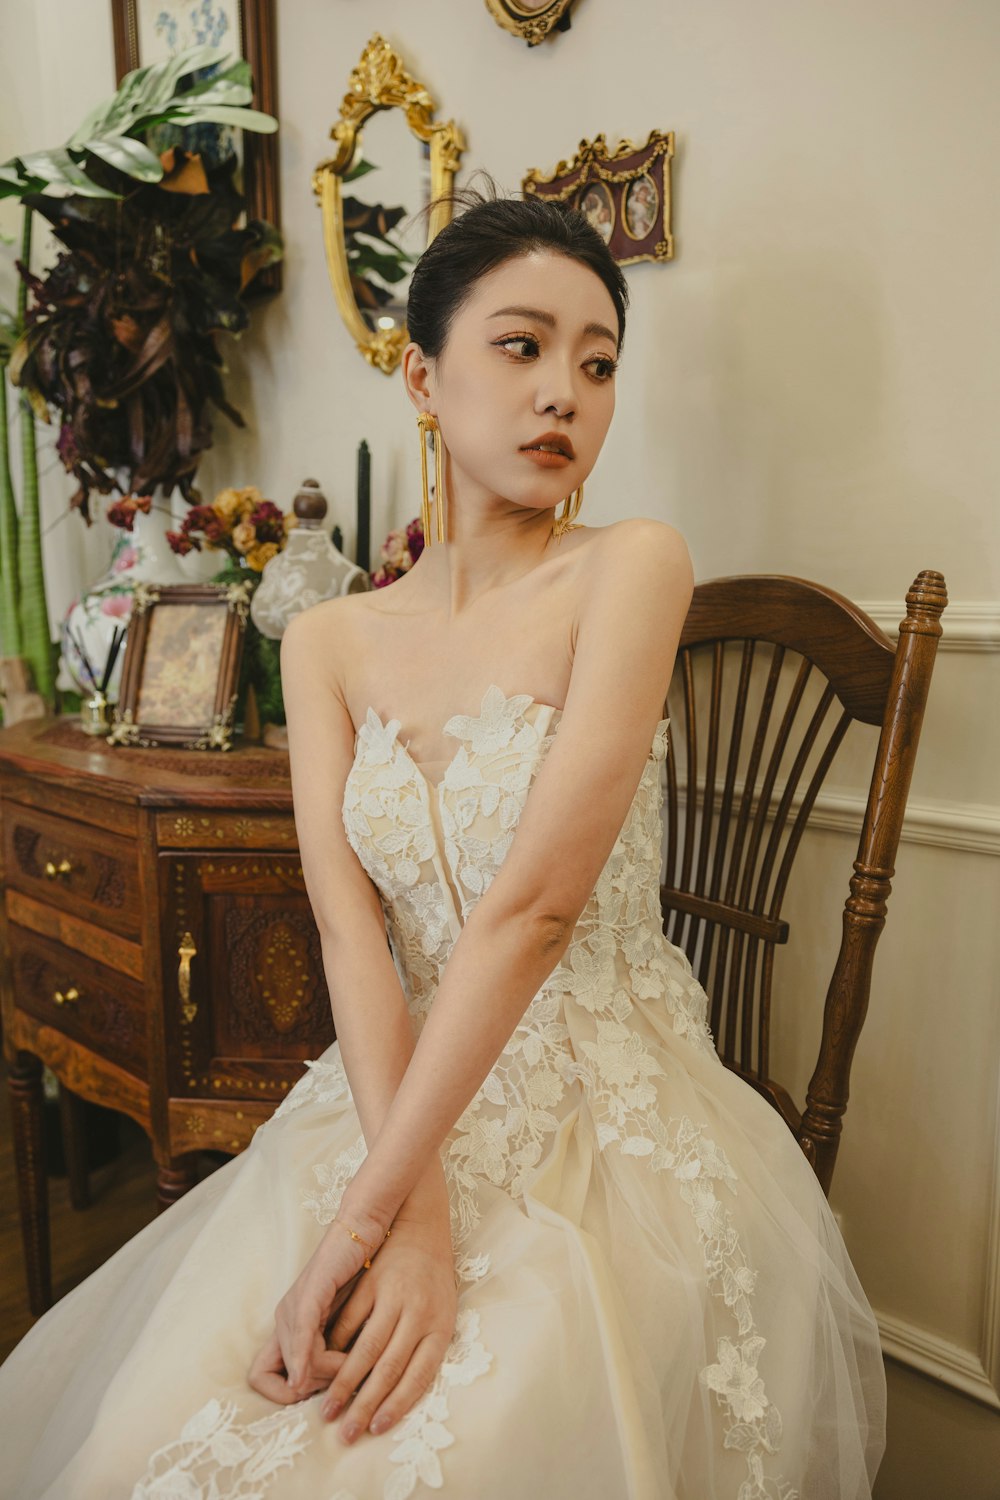 a woman in a wedding dress sitting on a chair